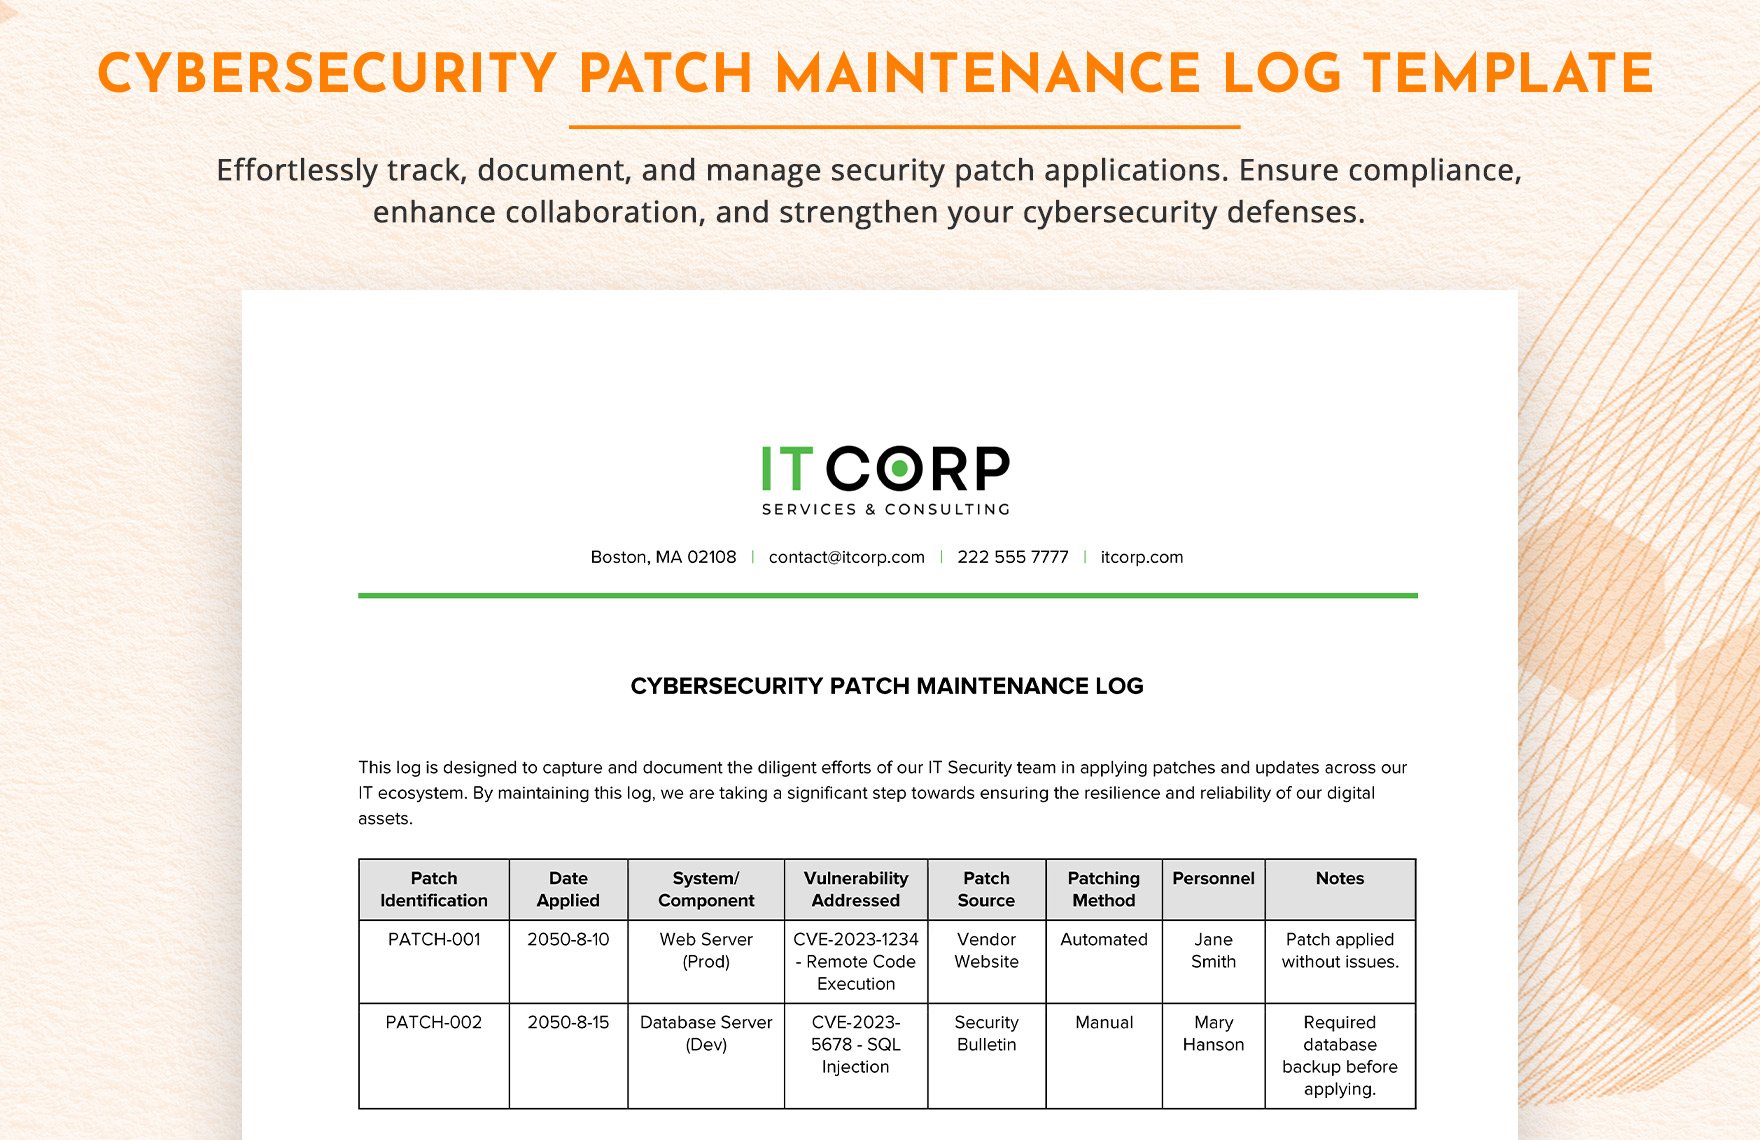 Cybersecurity Patch Maintenance Log Template